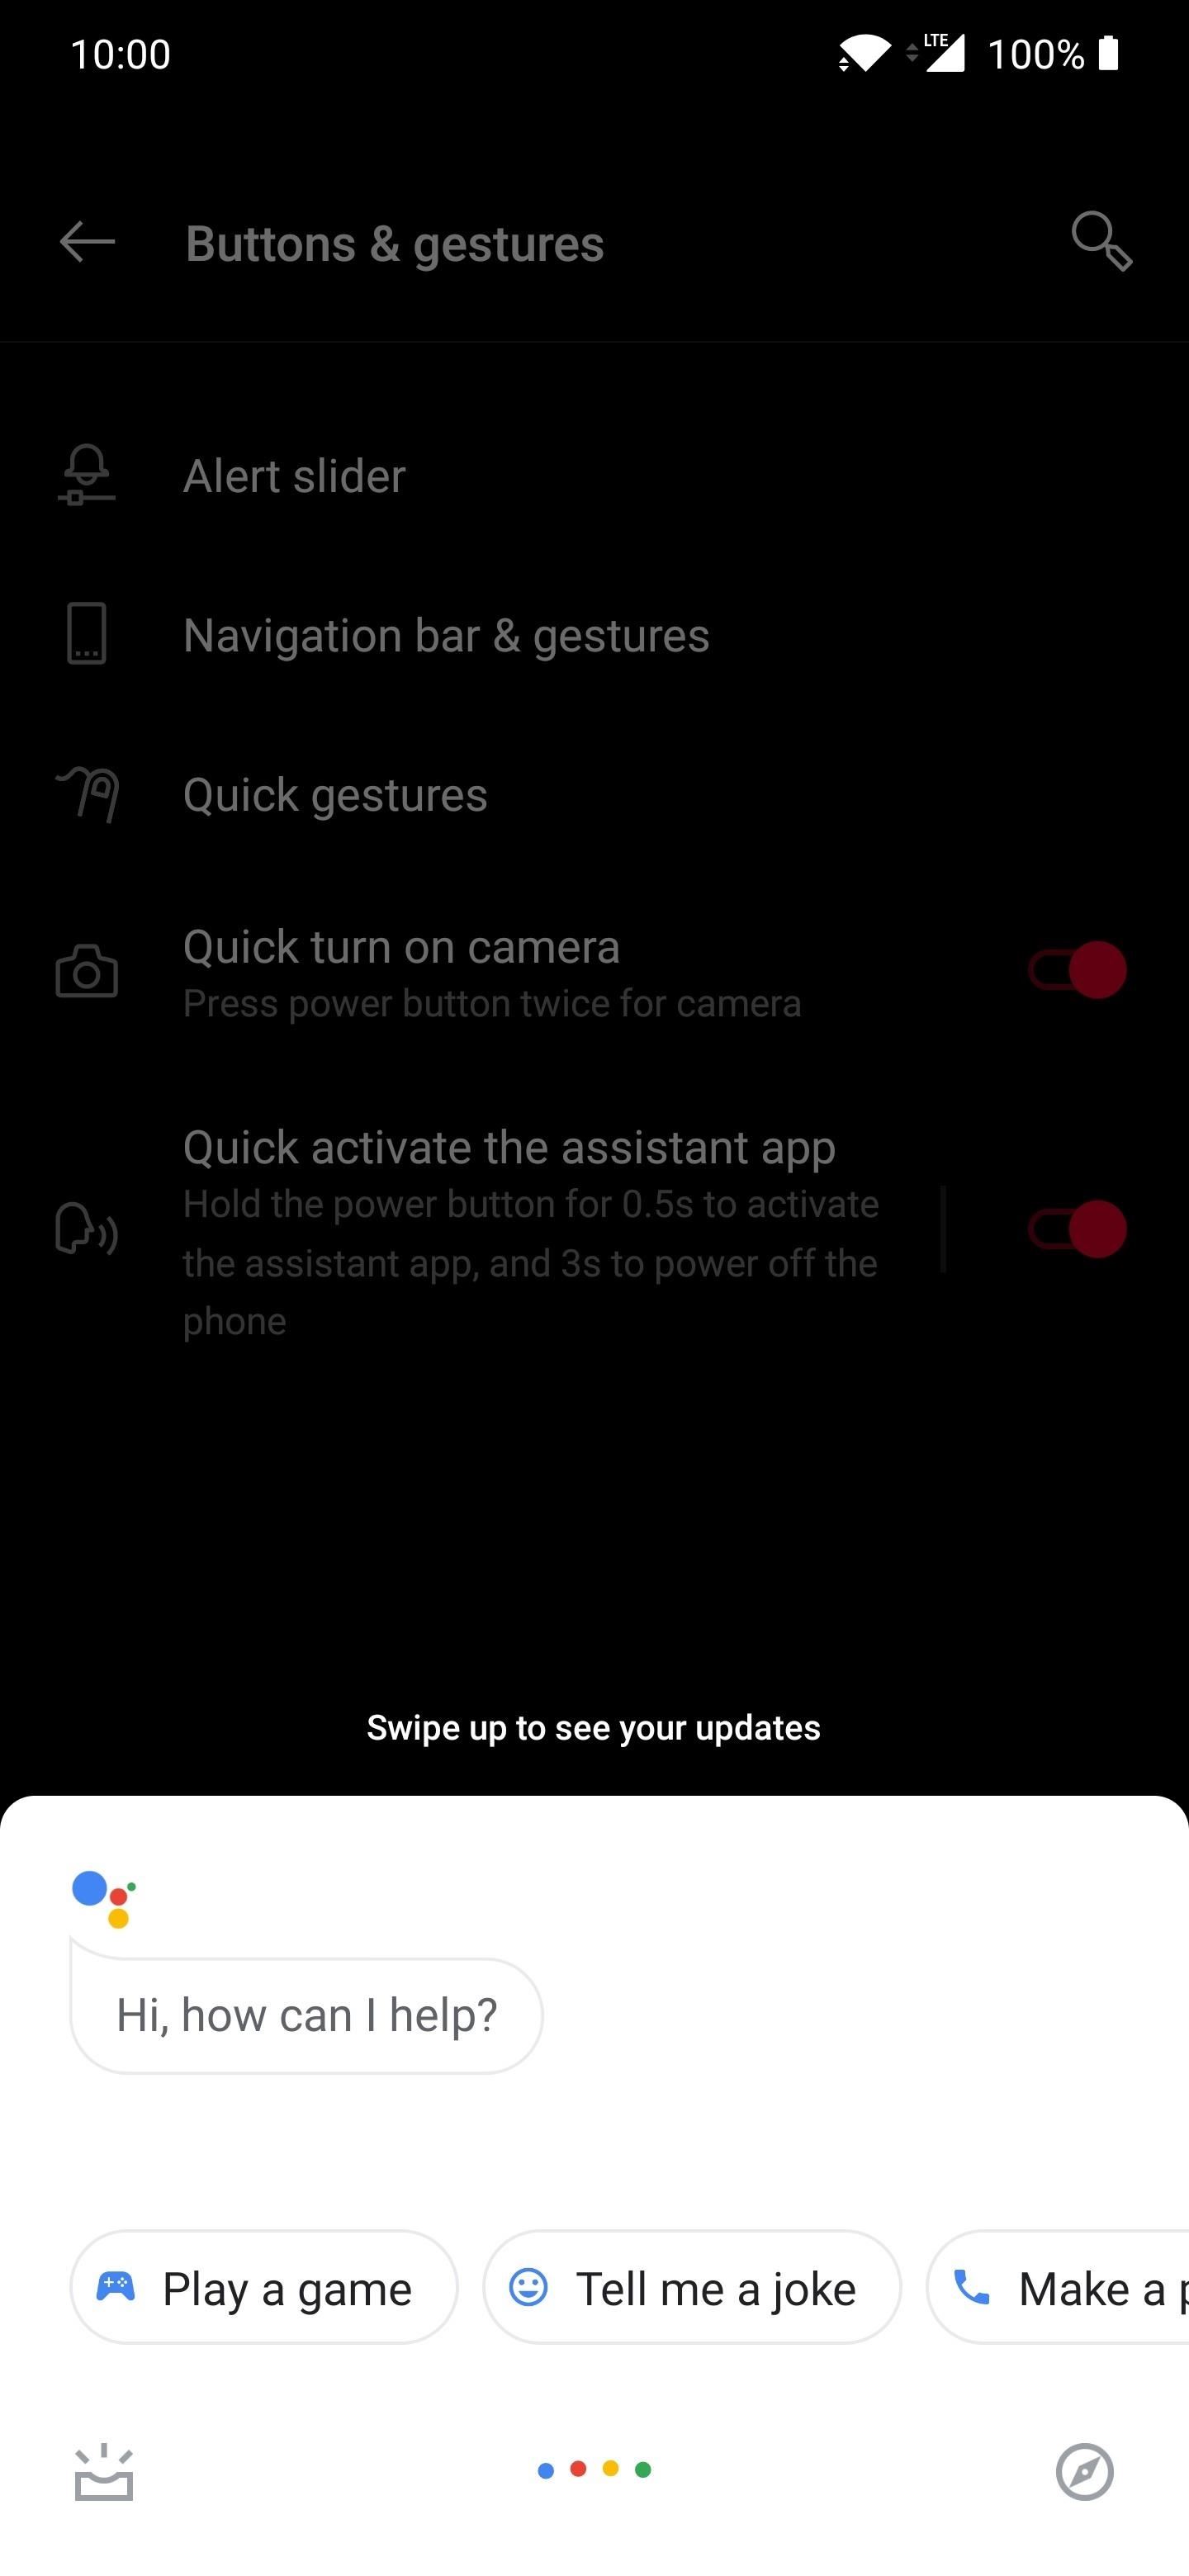 Make the Power Button Launch Google Assistant on Your OnePlus